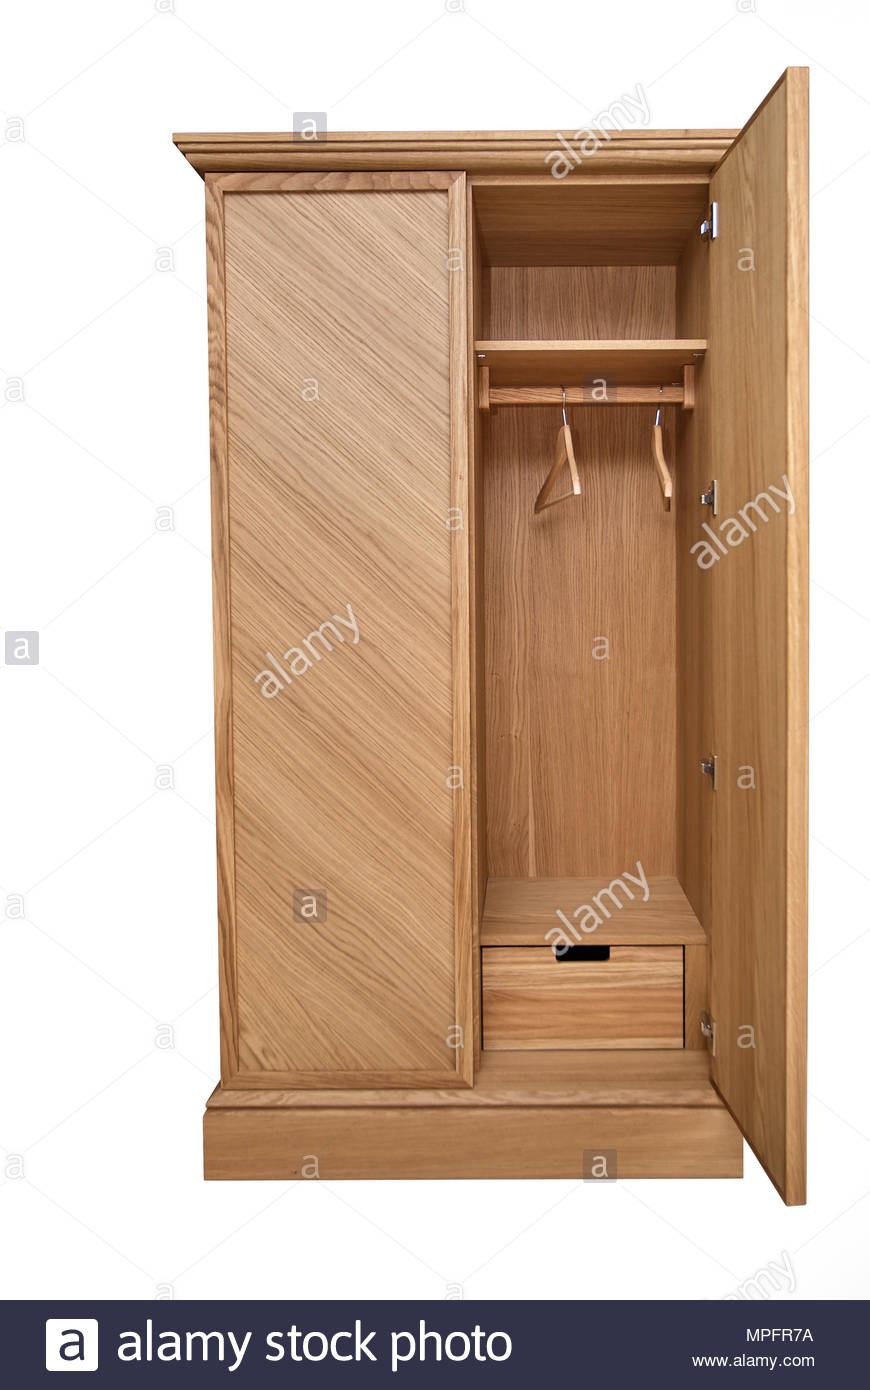 Wooden Cupboard Standing On A White Background Stock Photo